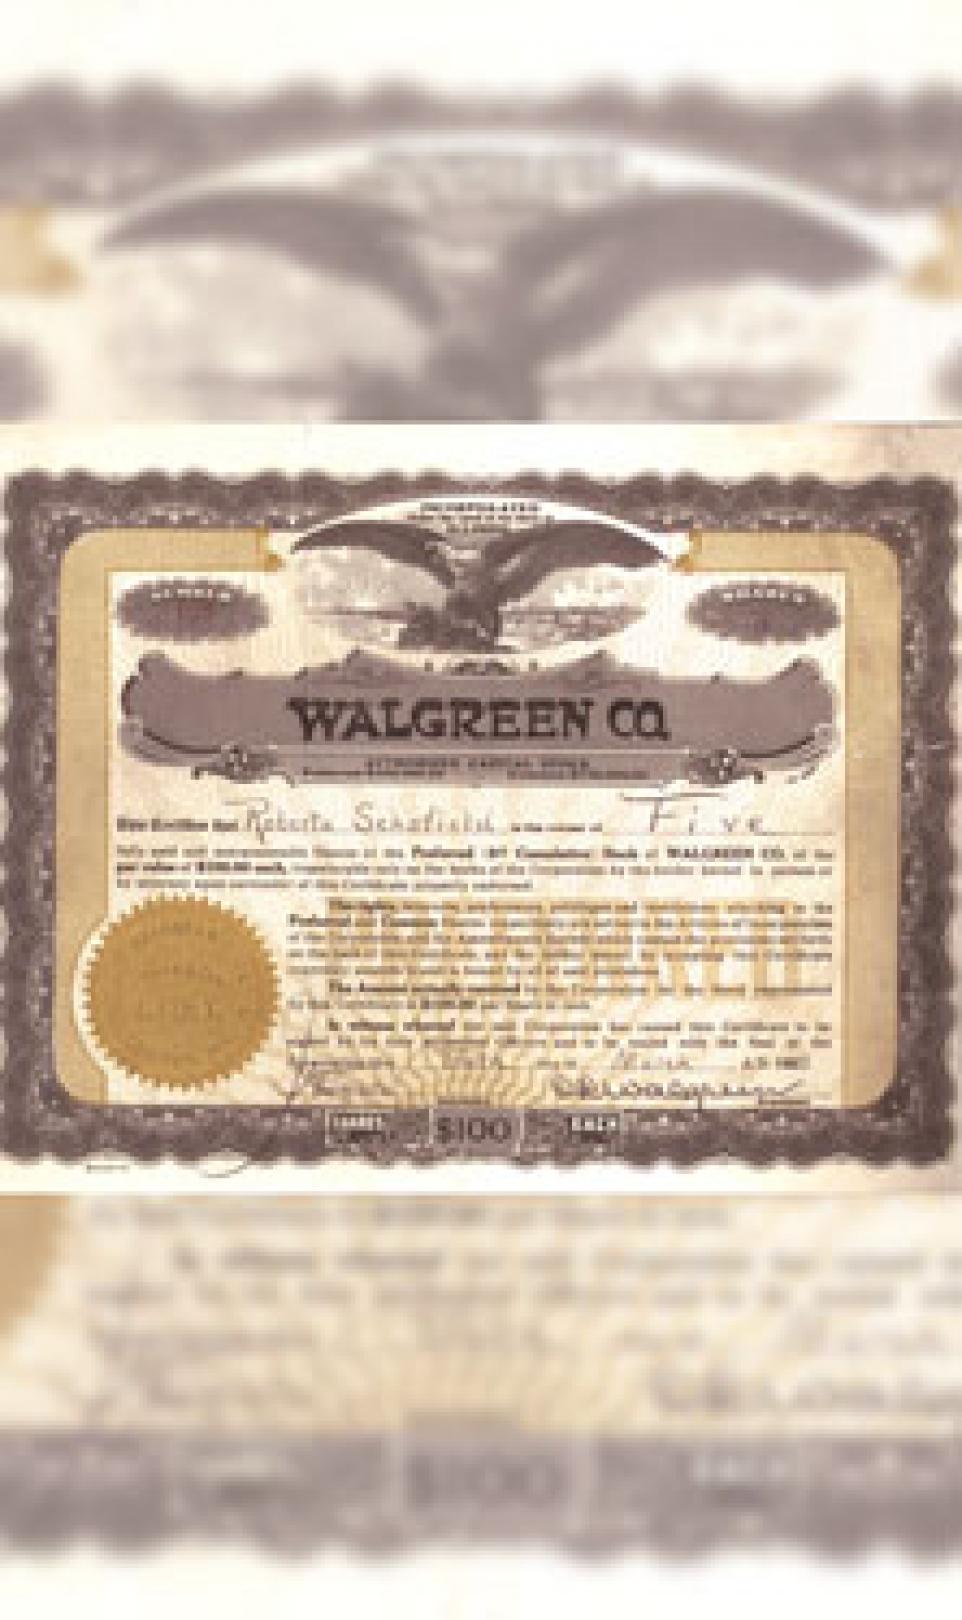 Photo of one of the first Walgreens stock certificates